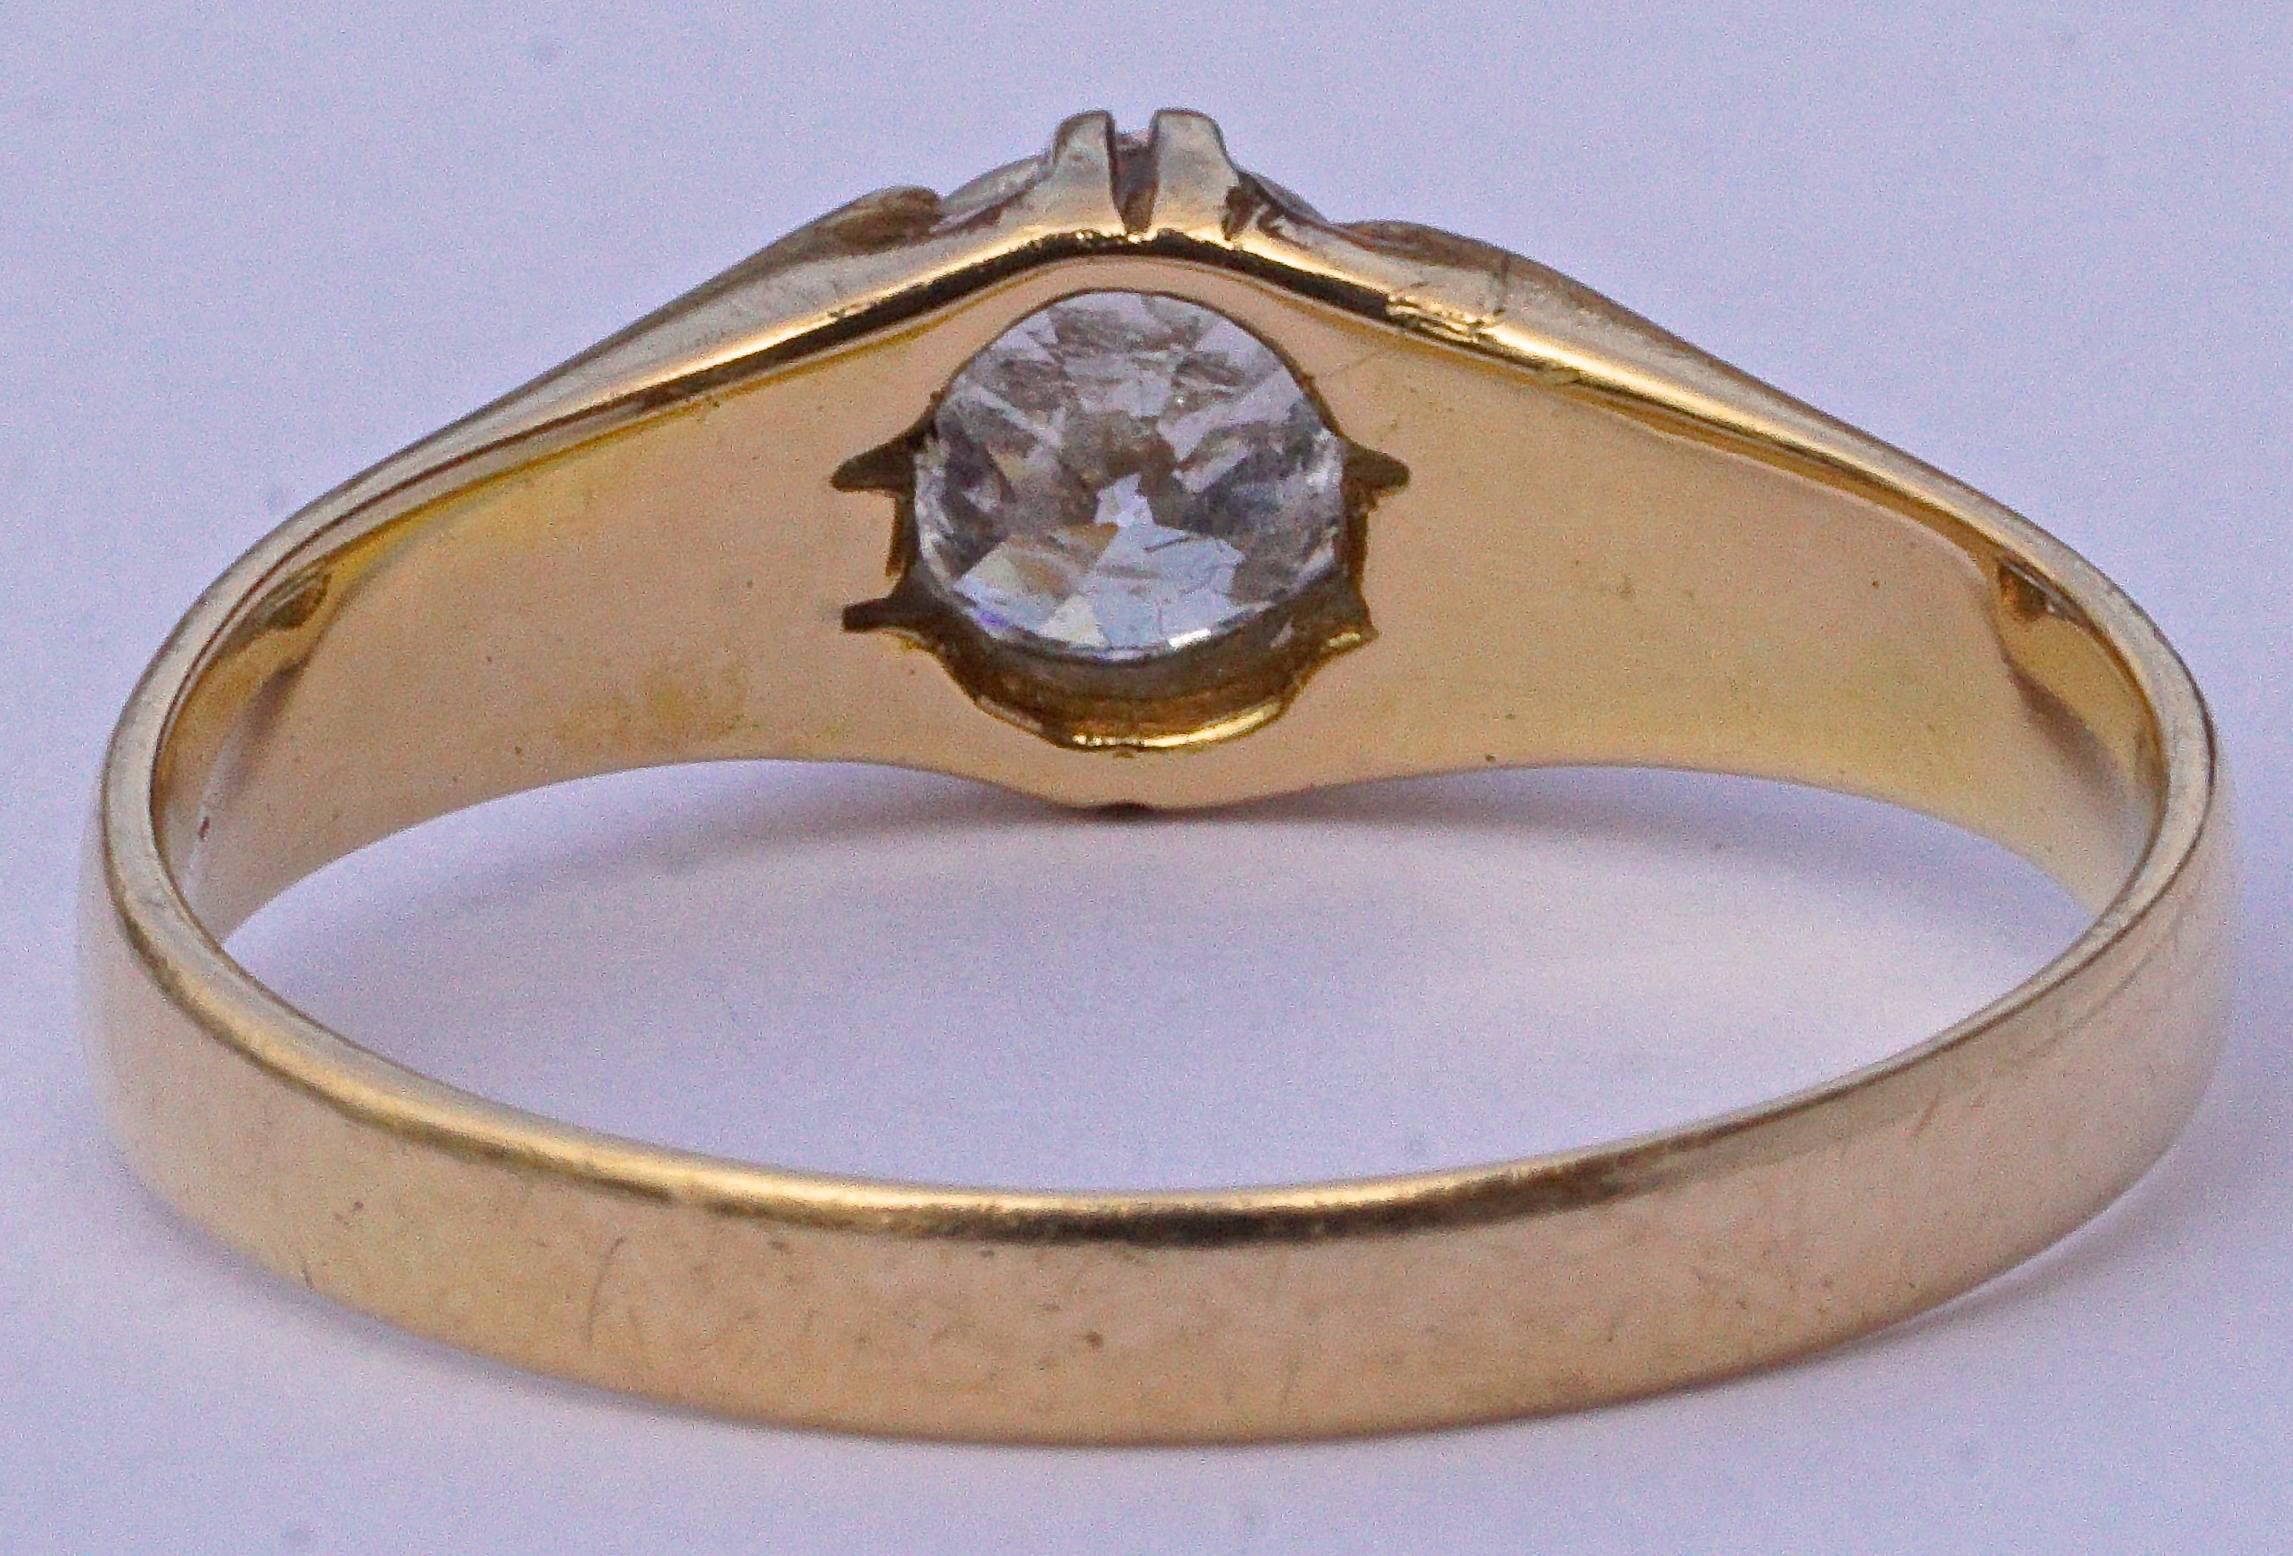 18ct gold ring featuring a lovely diamond solitaire. Ring size UK Q 1/2 / US 8 1/4, and inside diameter 1.9cm / .75 inches. The setting depth is 3mm / .12 inch. The old cut diamond is .48 - .52 carats, and the inside band is stamped 18CT. One of the